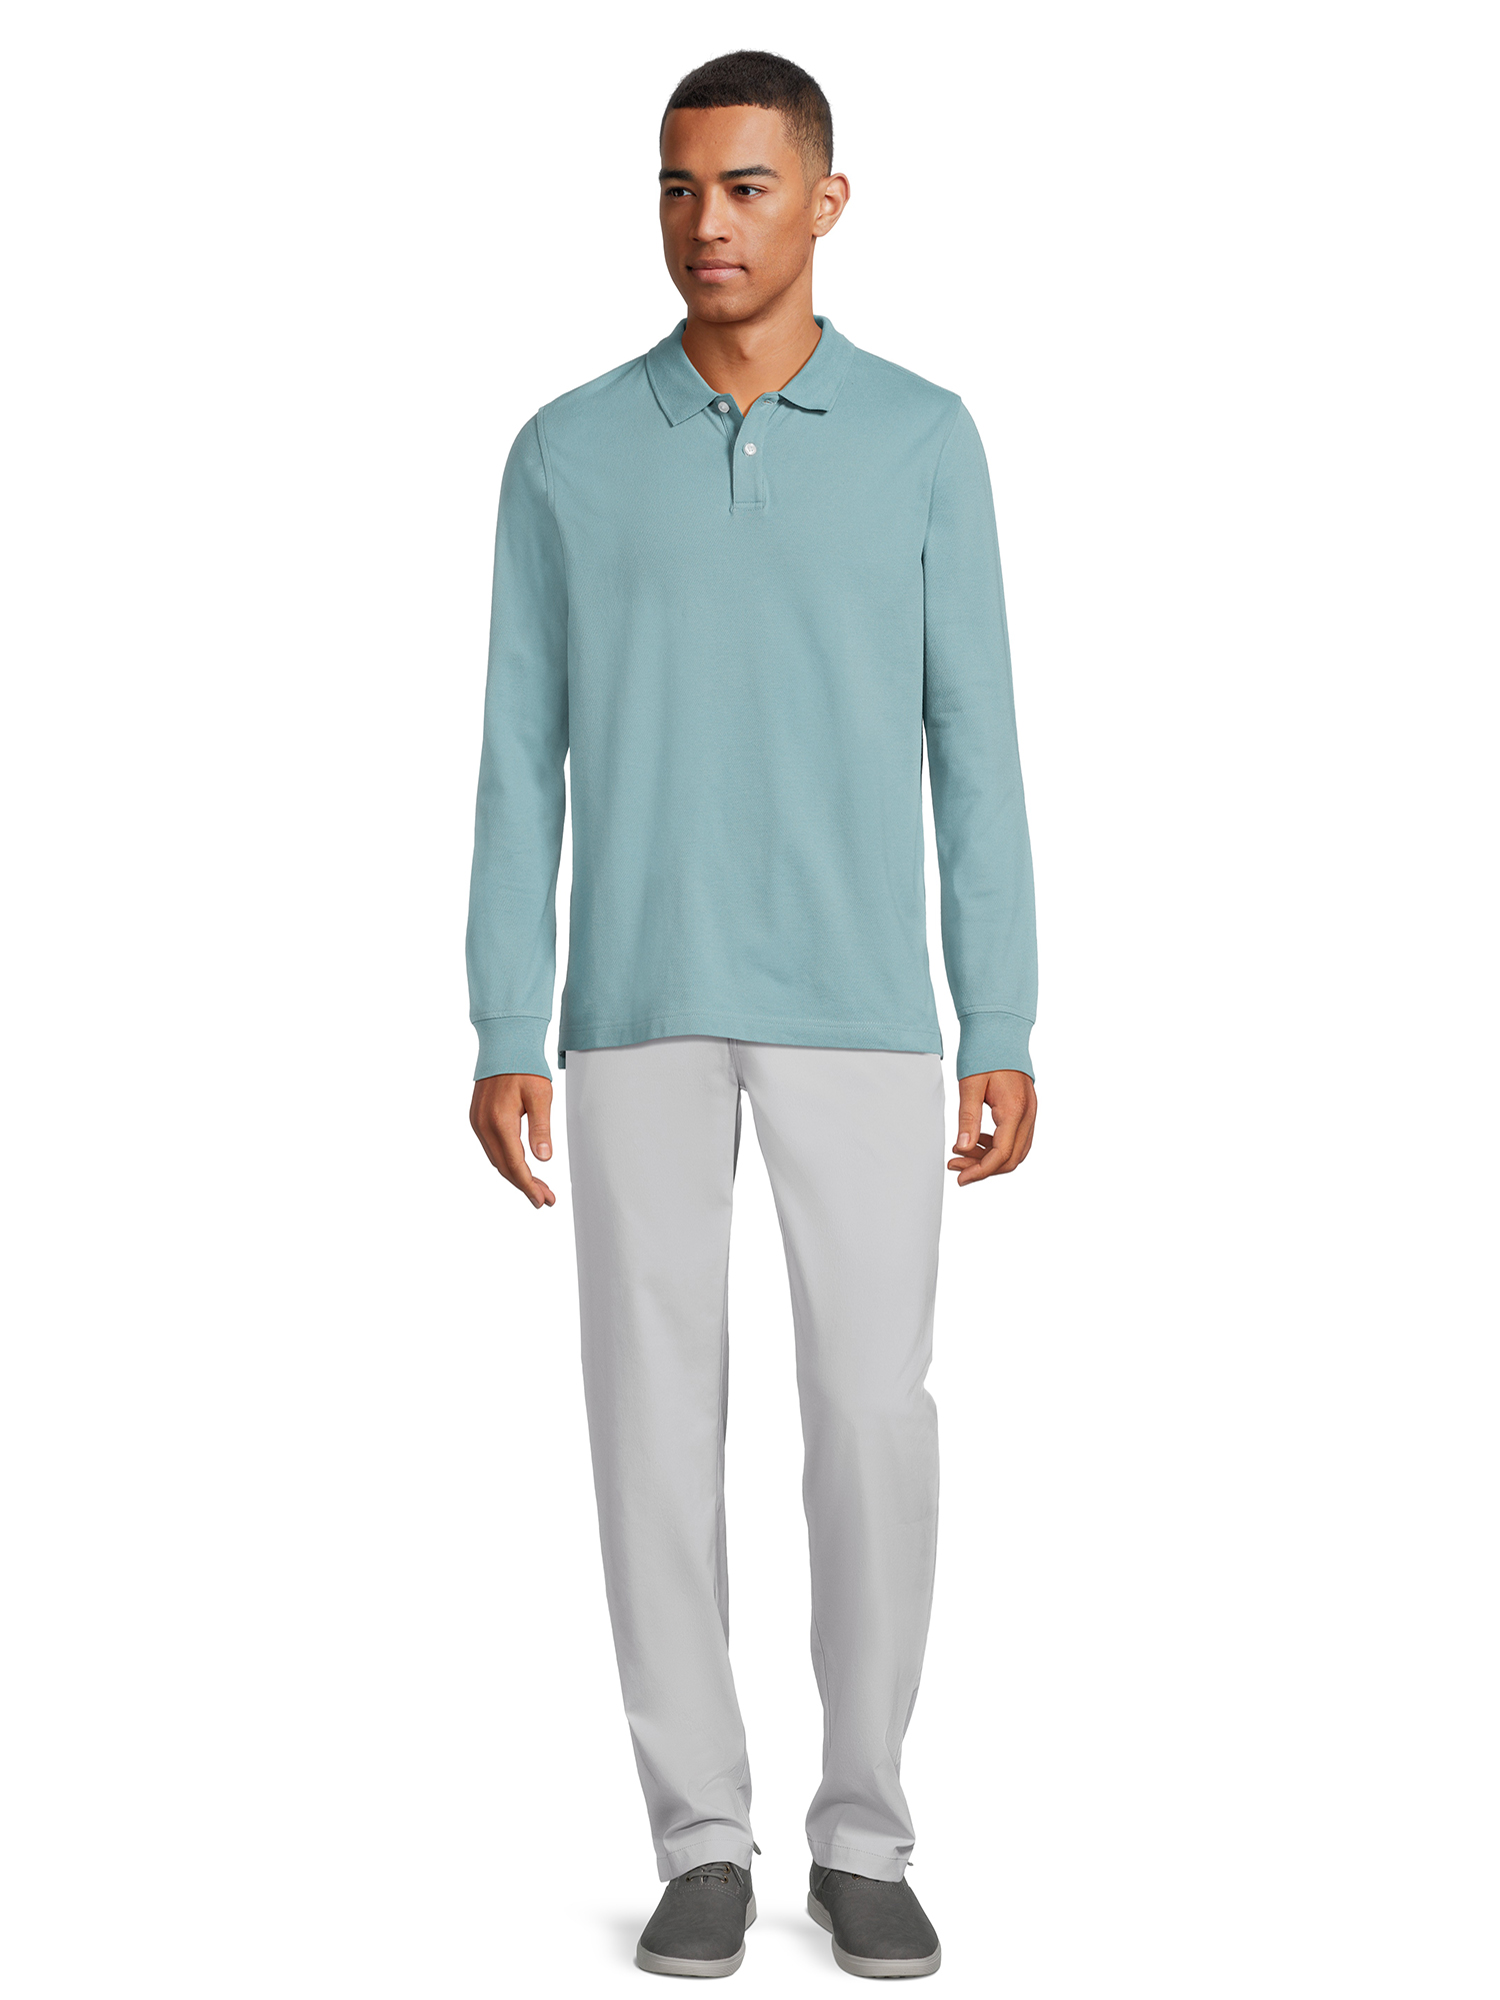 George Men's Pique Polo Shirt with Long Sleeves, Sizes S-3XL - image 3 of 6